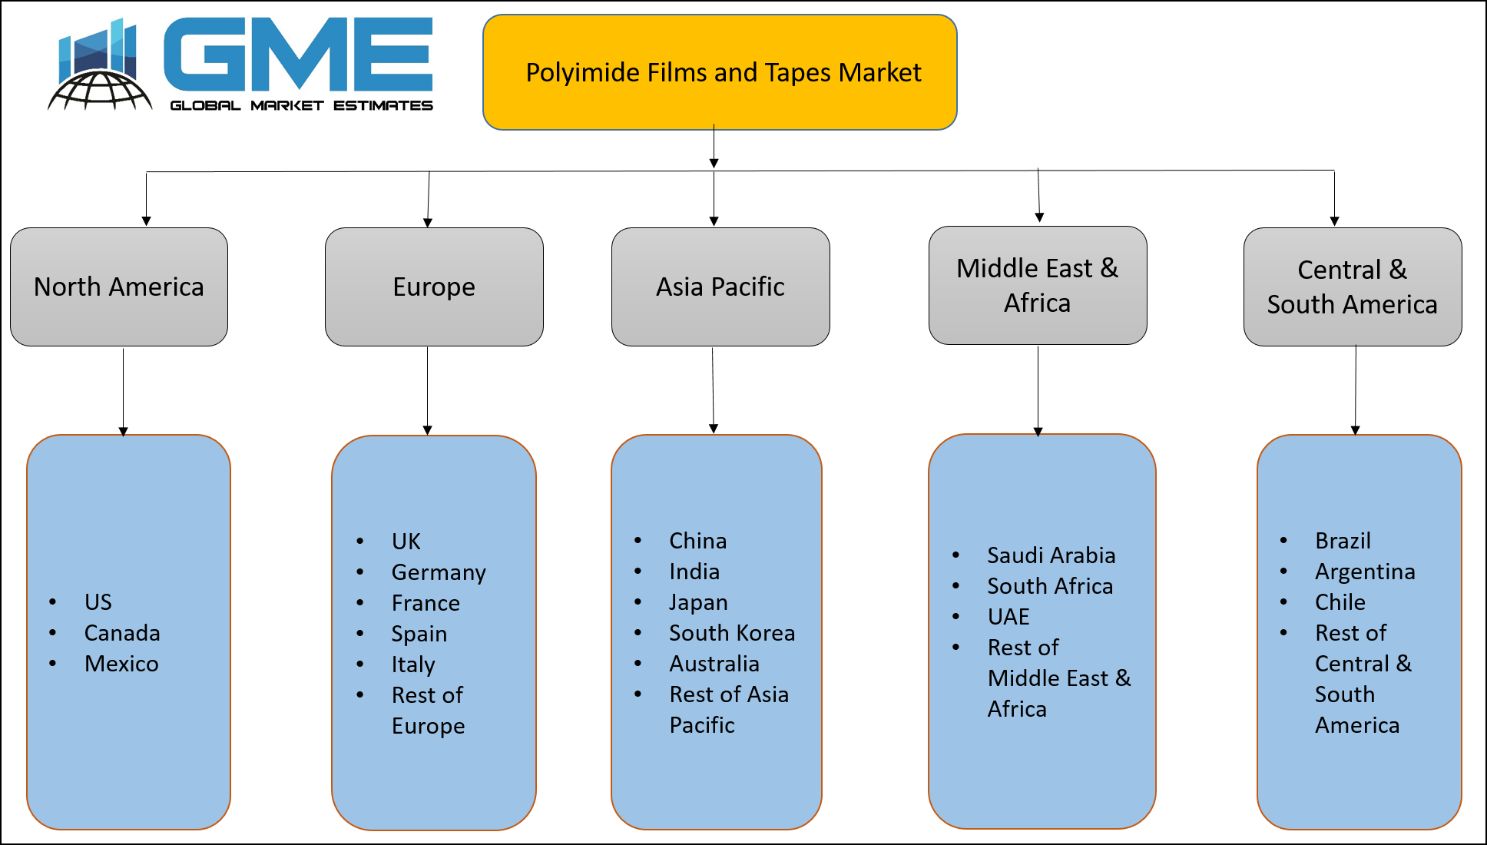 Polyimide Films and Tapes Market